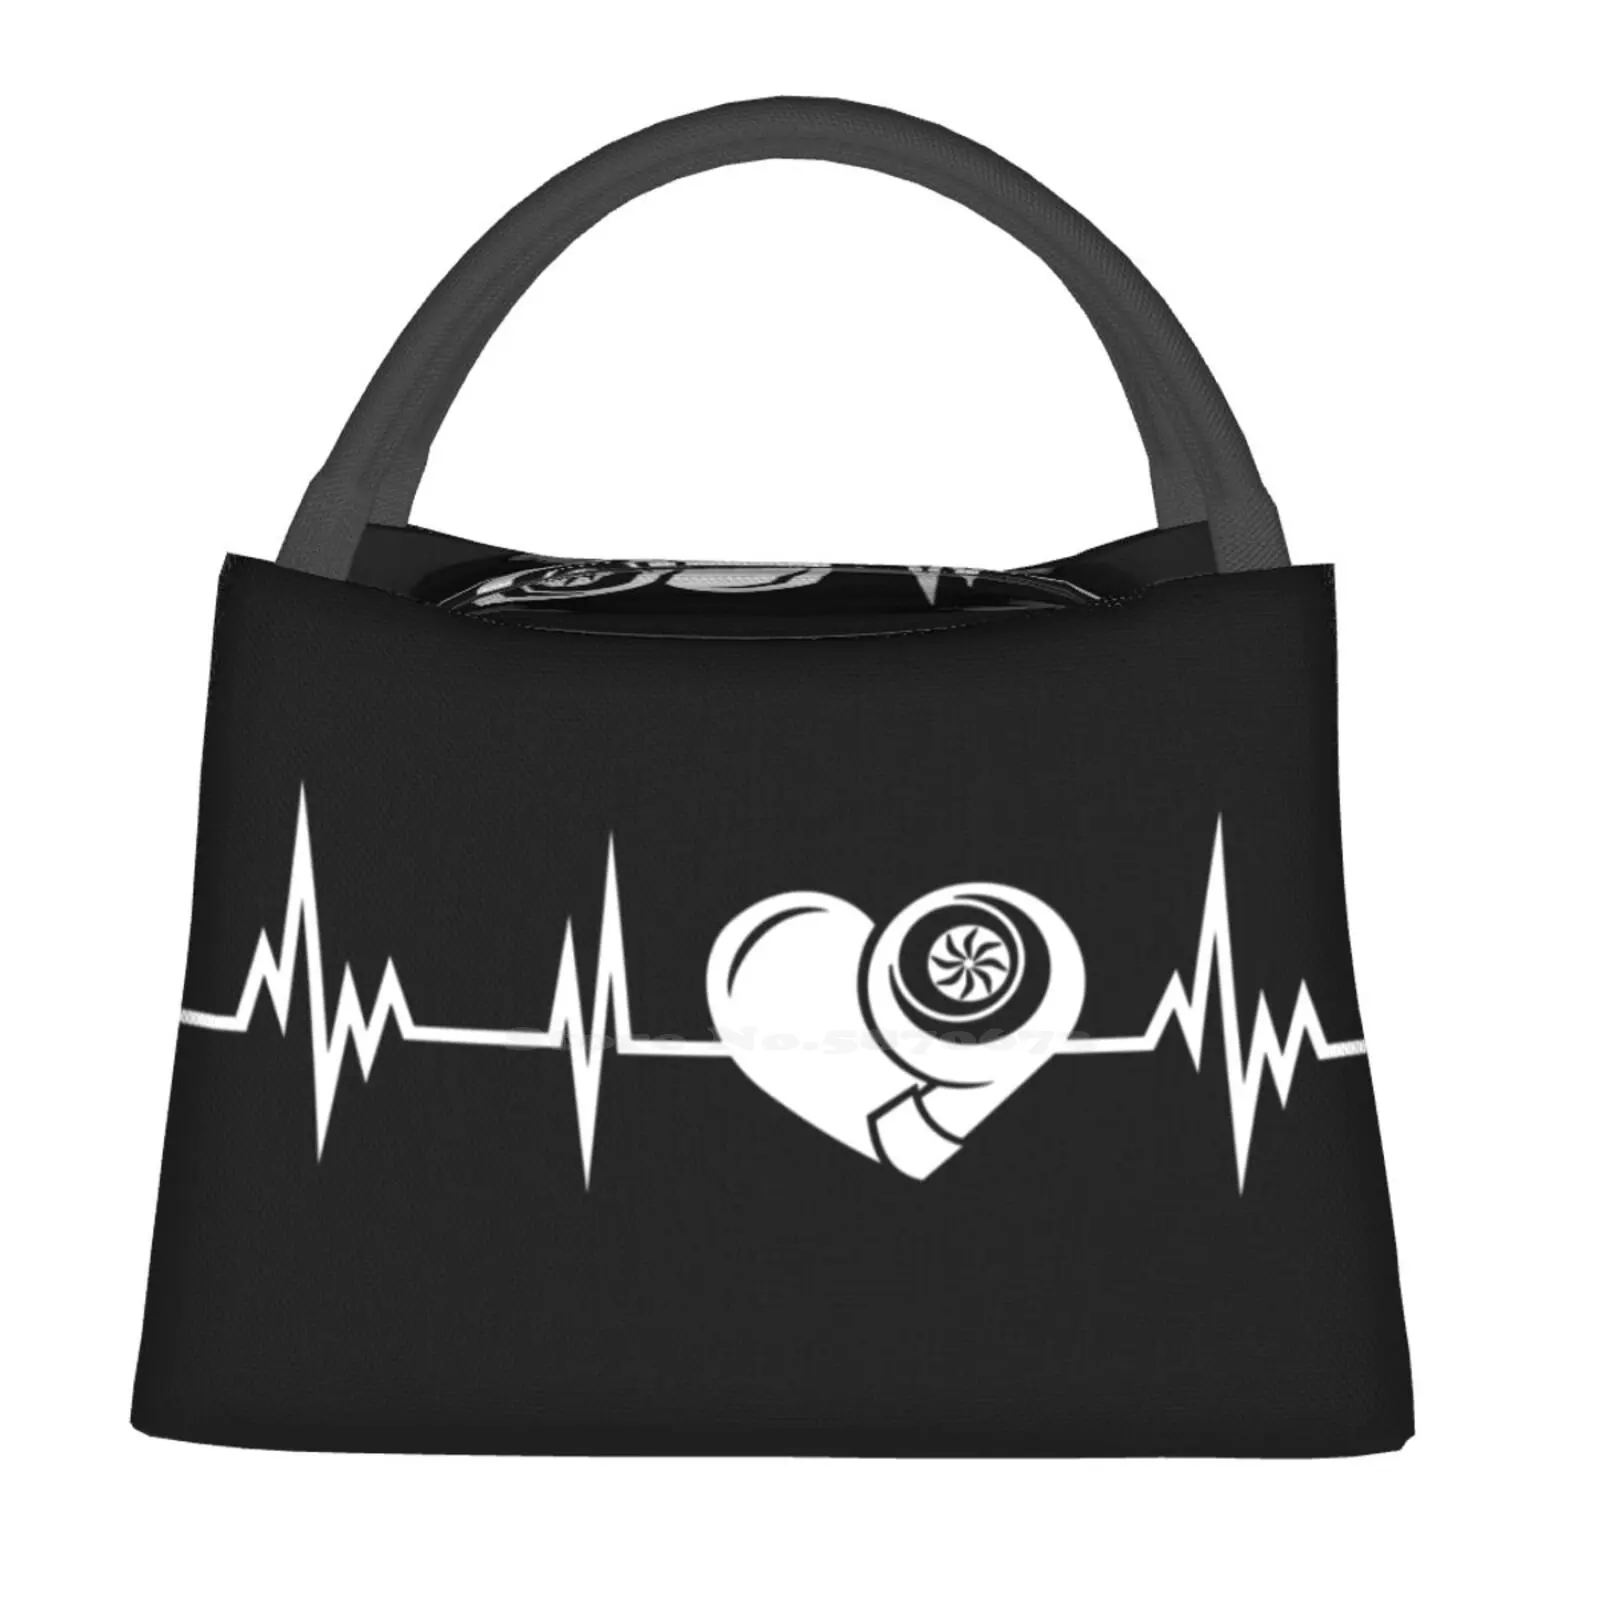 

Turbo Heartbeat | Gift For Turboboost Addict Portable Lunch Bag New Thermal Insulated Lunch Tote High Quality Engineering Car